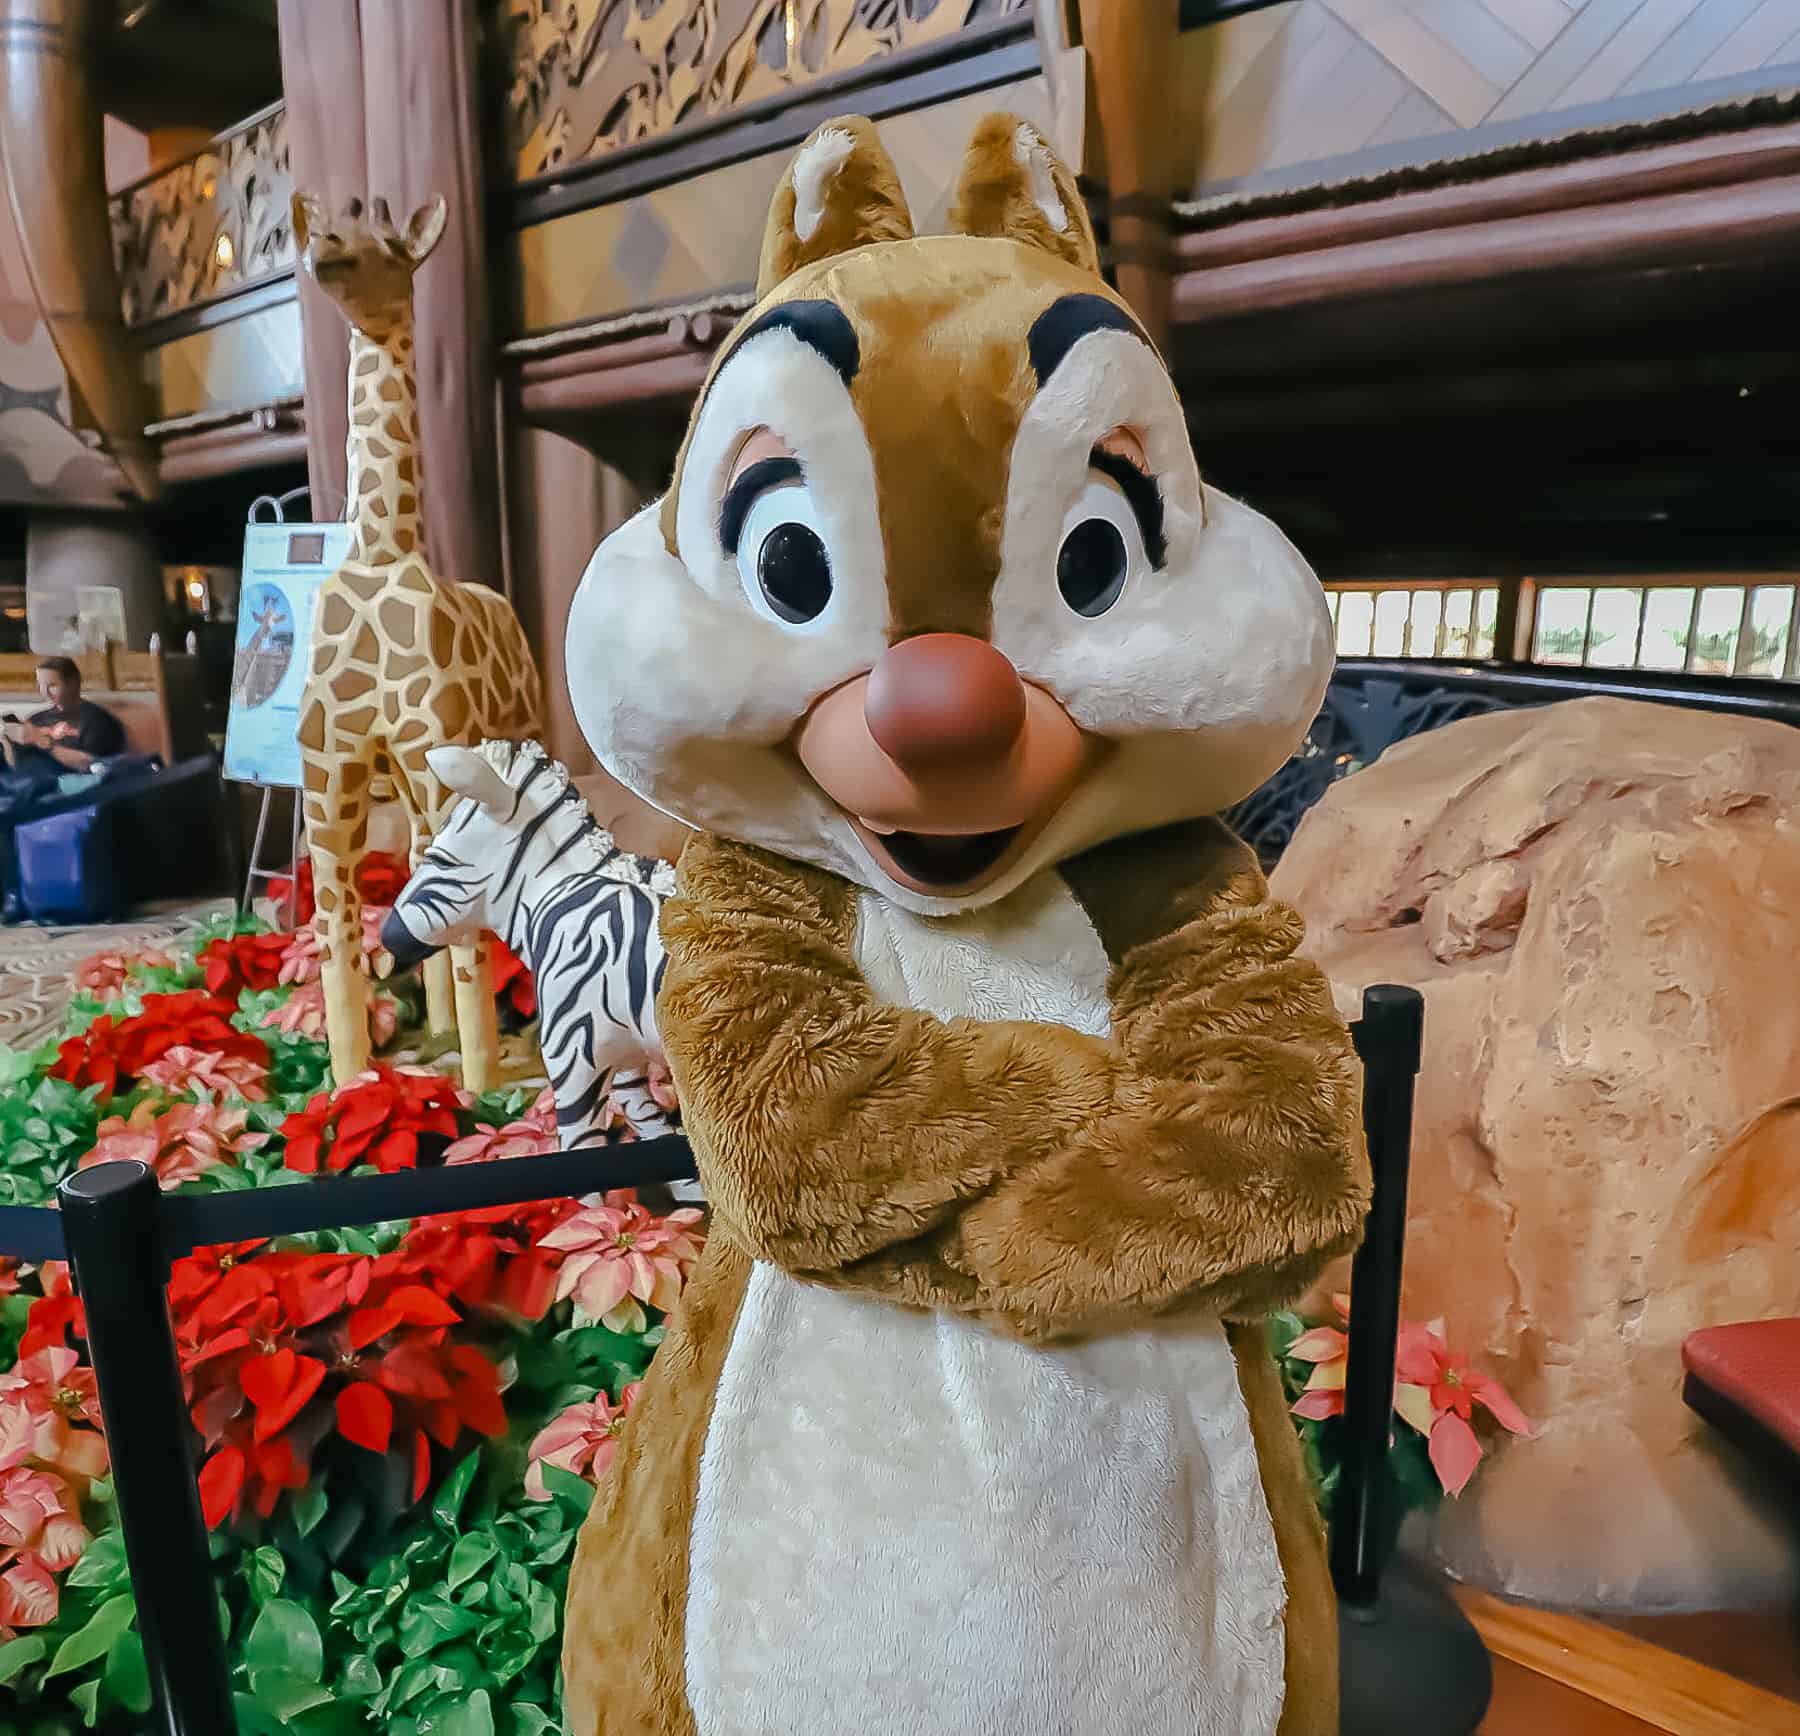 Dale of Chip and Dale poses for a photo near the gingerbread display. 